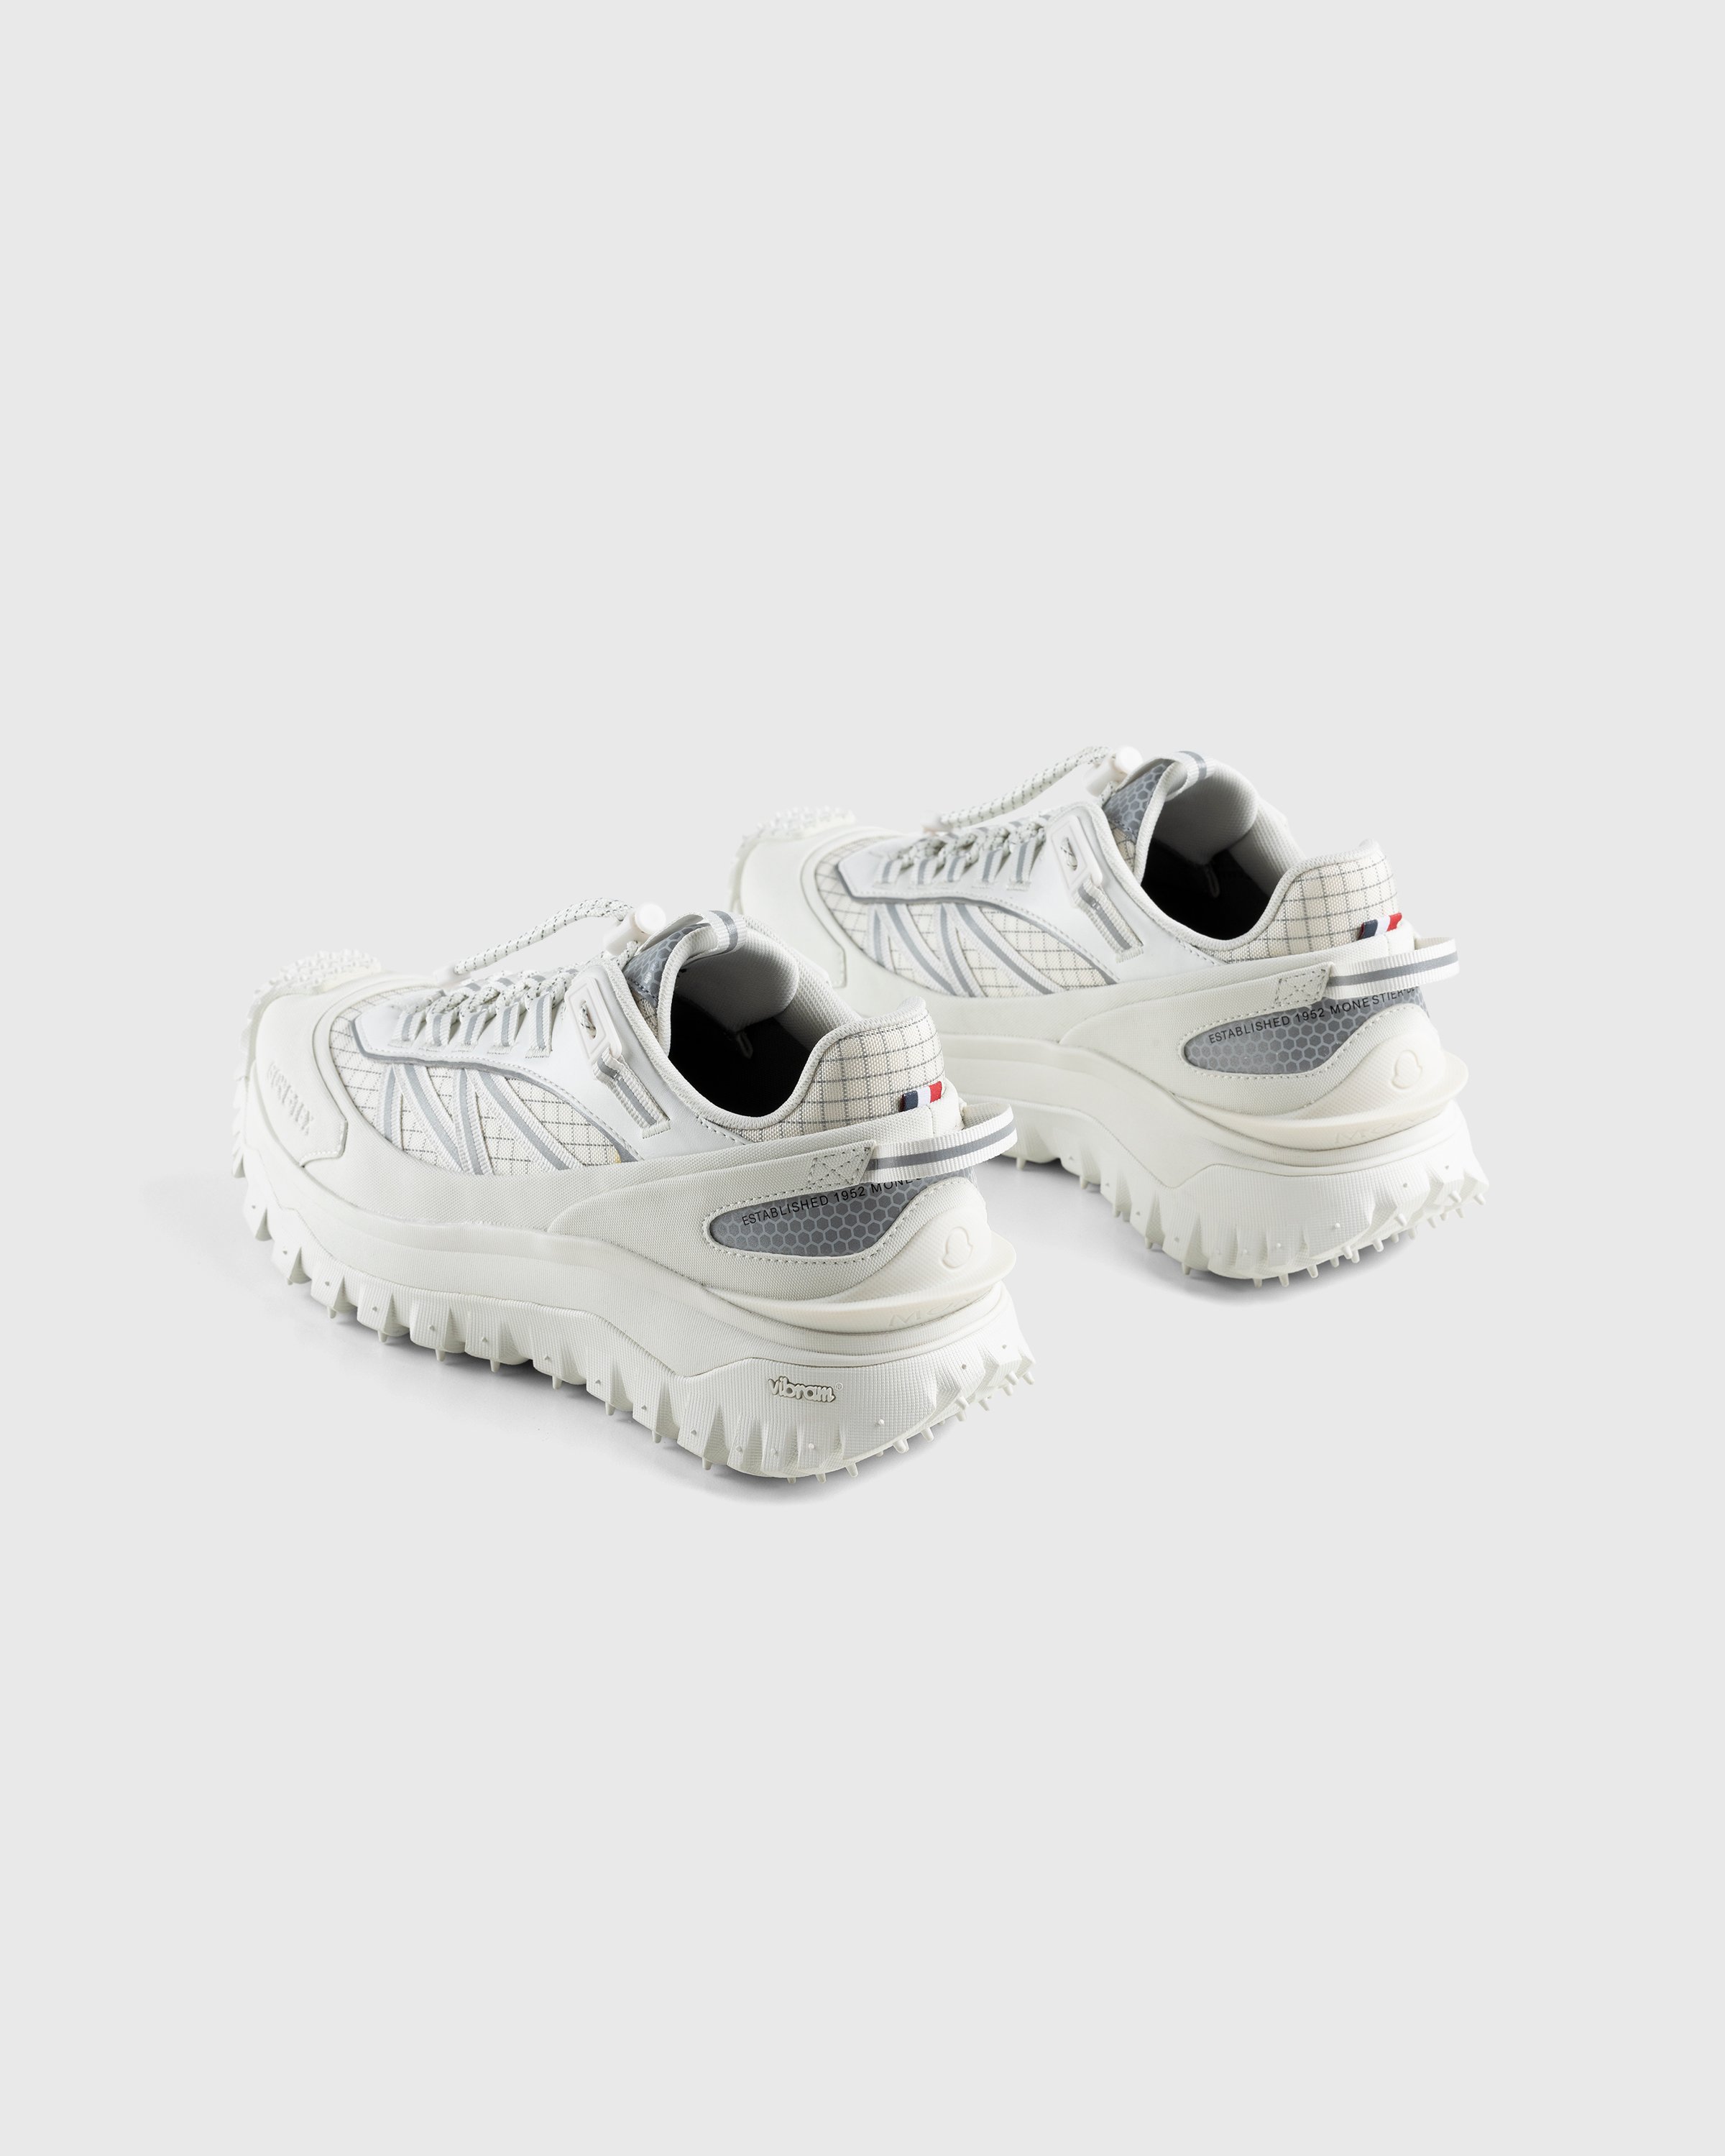 Moncler - Trailgrip GTX Sneakers Off White - Footwear - White - Image 4